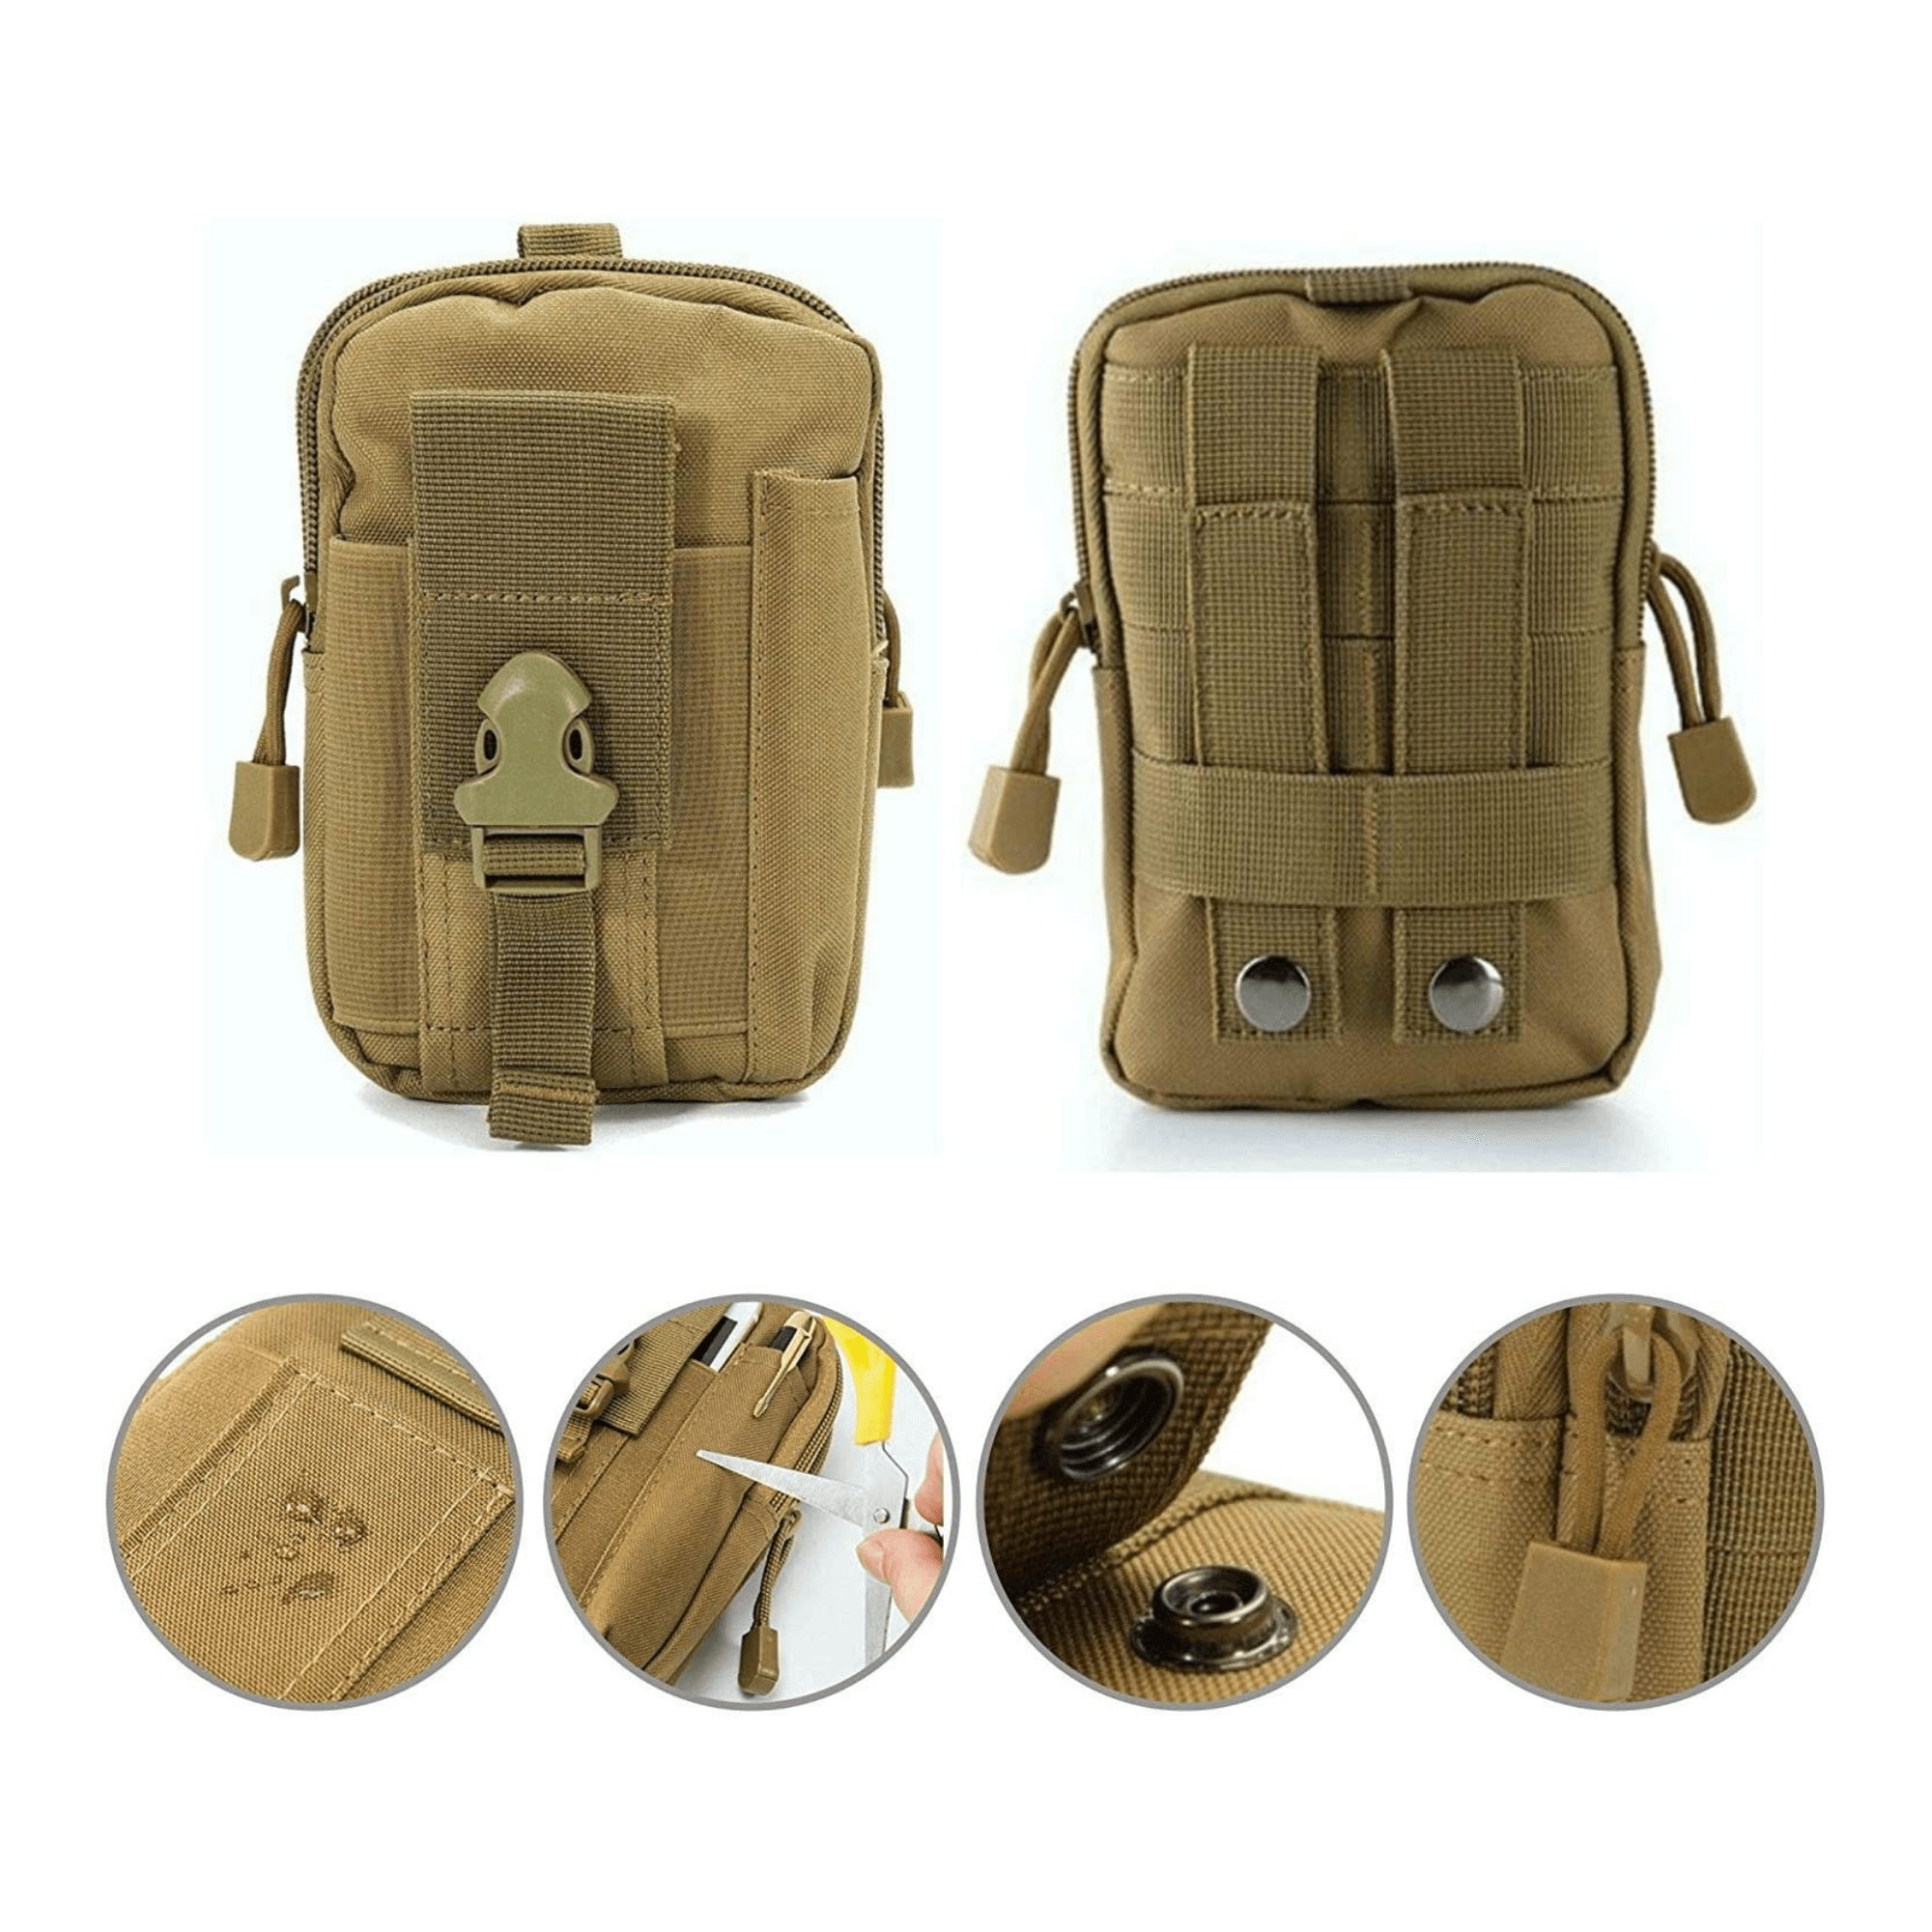 Tactical MOLLE Pouch & Waist Bag for Hiking & Outdoor Activities-42